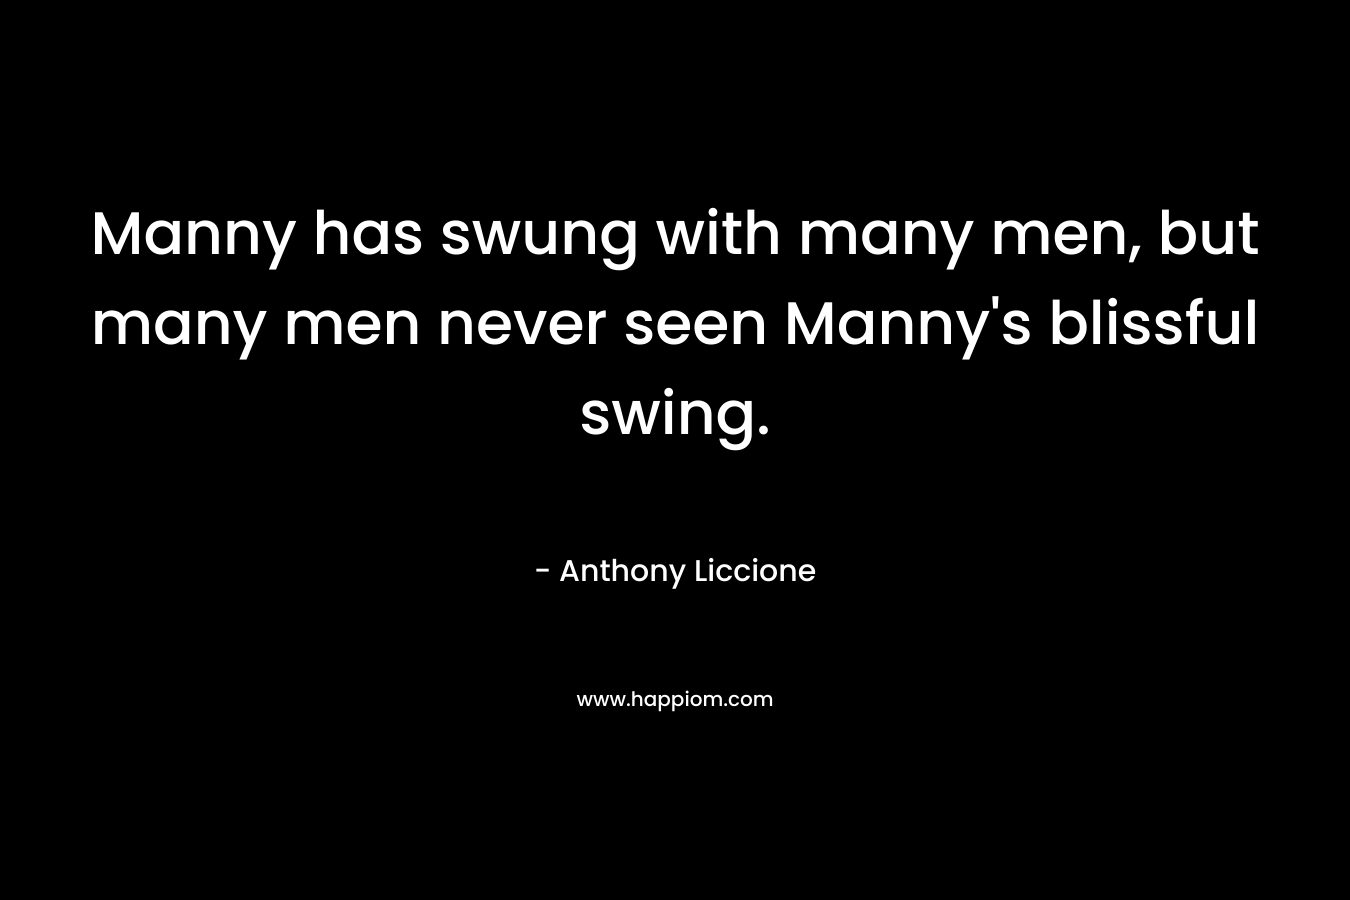 Manny has swung with many men, but many men never seen Manny's blissful swing.